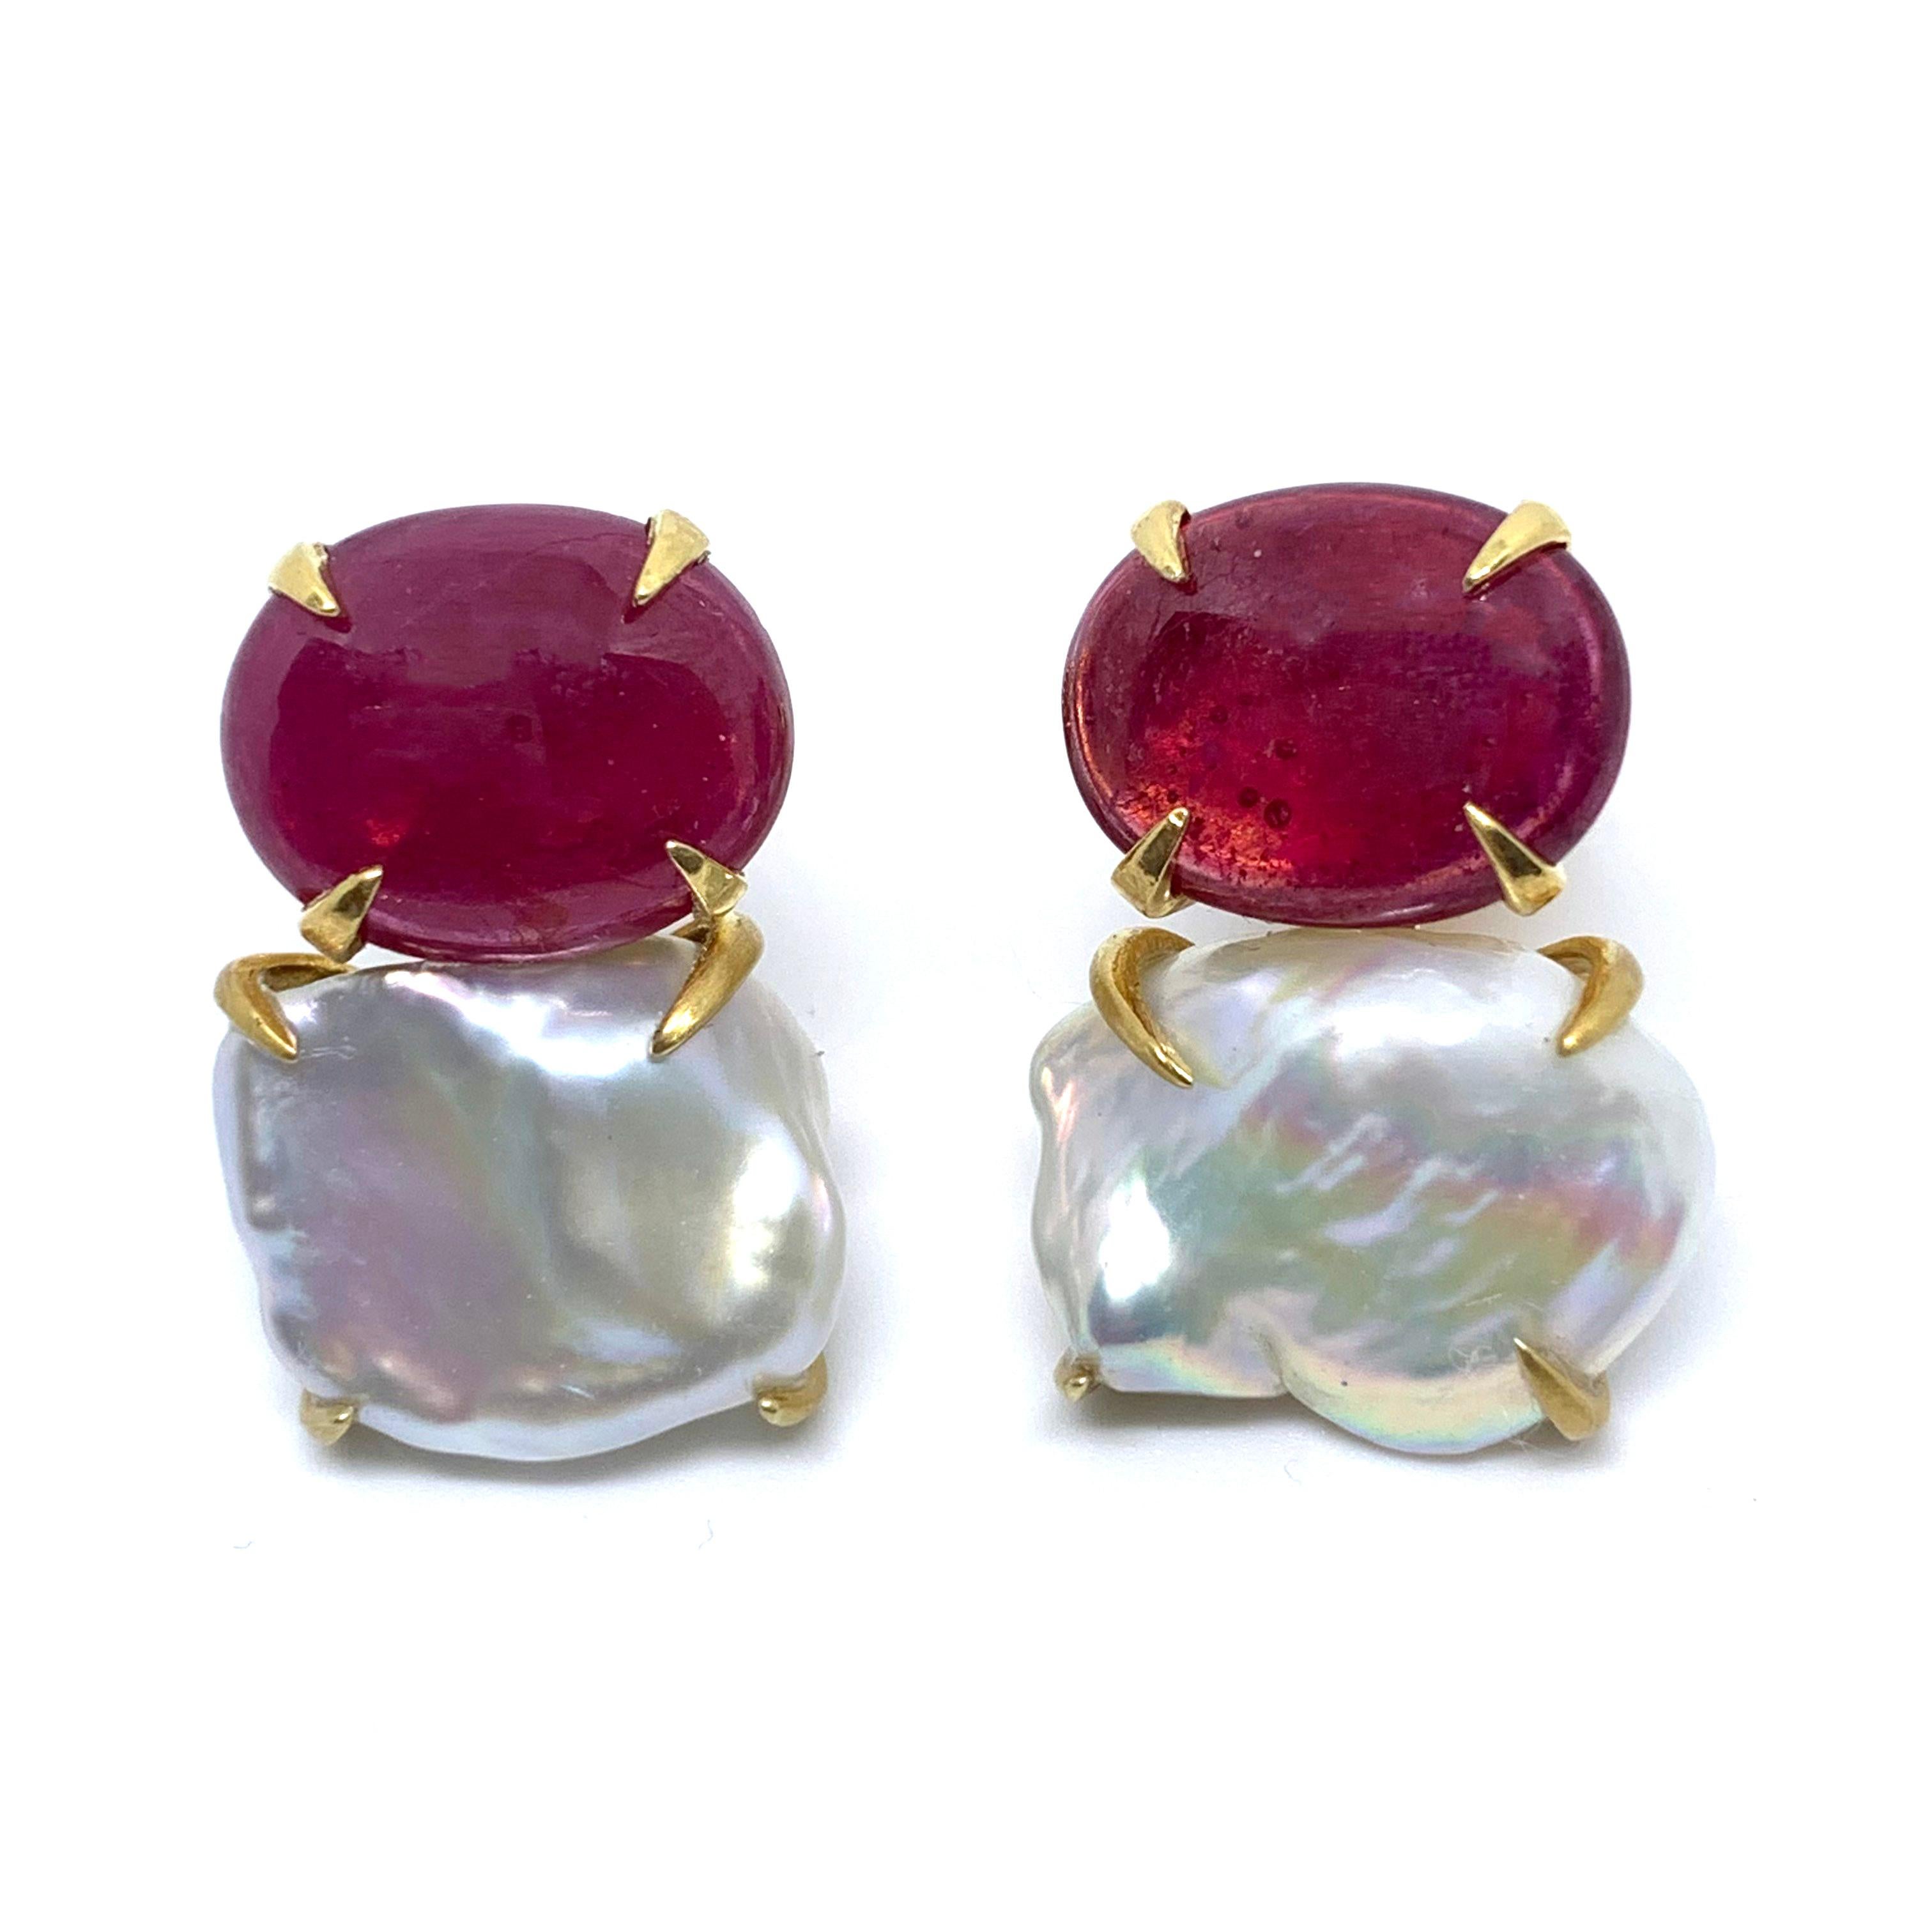 Stunning Bijoux Num Genuine Oval Ruby and Keishi Pearl Vermeil Earrings. 
The earrings feature 2 beautiful oval cabochon-cut genuine ruby and 2 lustrous cultured Japanese Keishi pearl, handset in 18k gold vermeil over sterling silver and brush satin